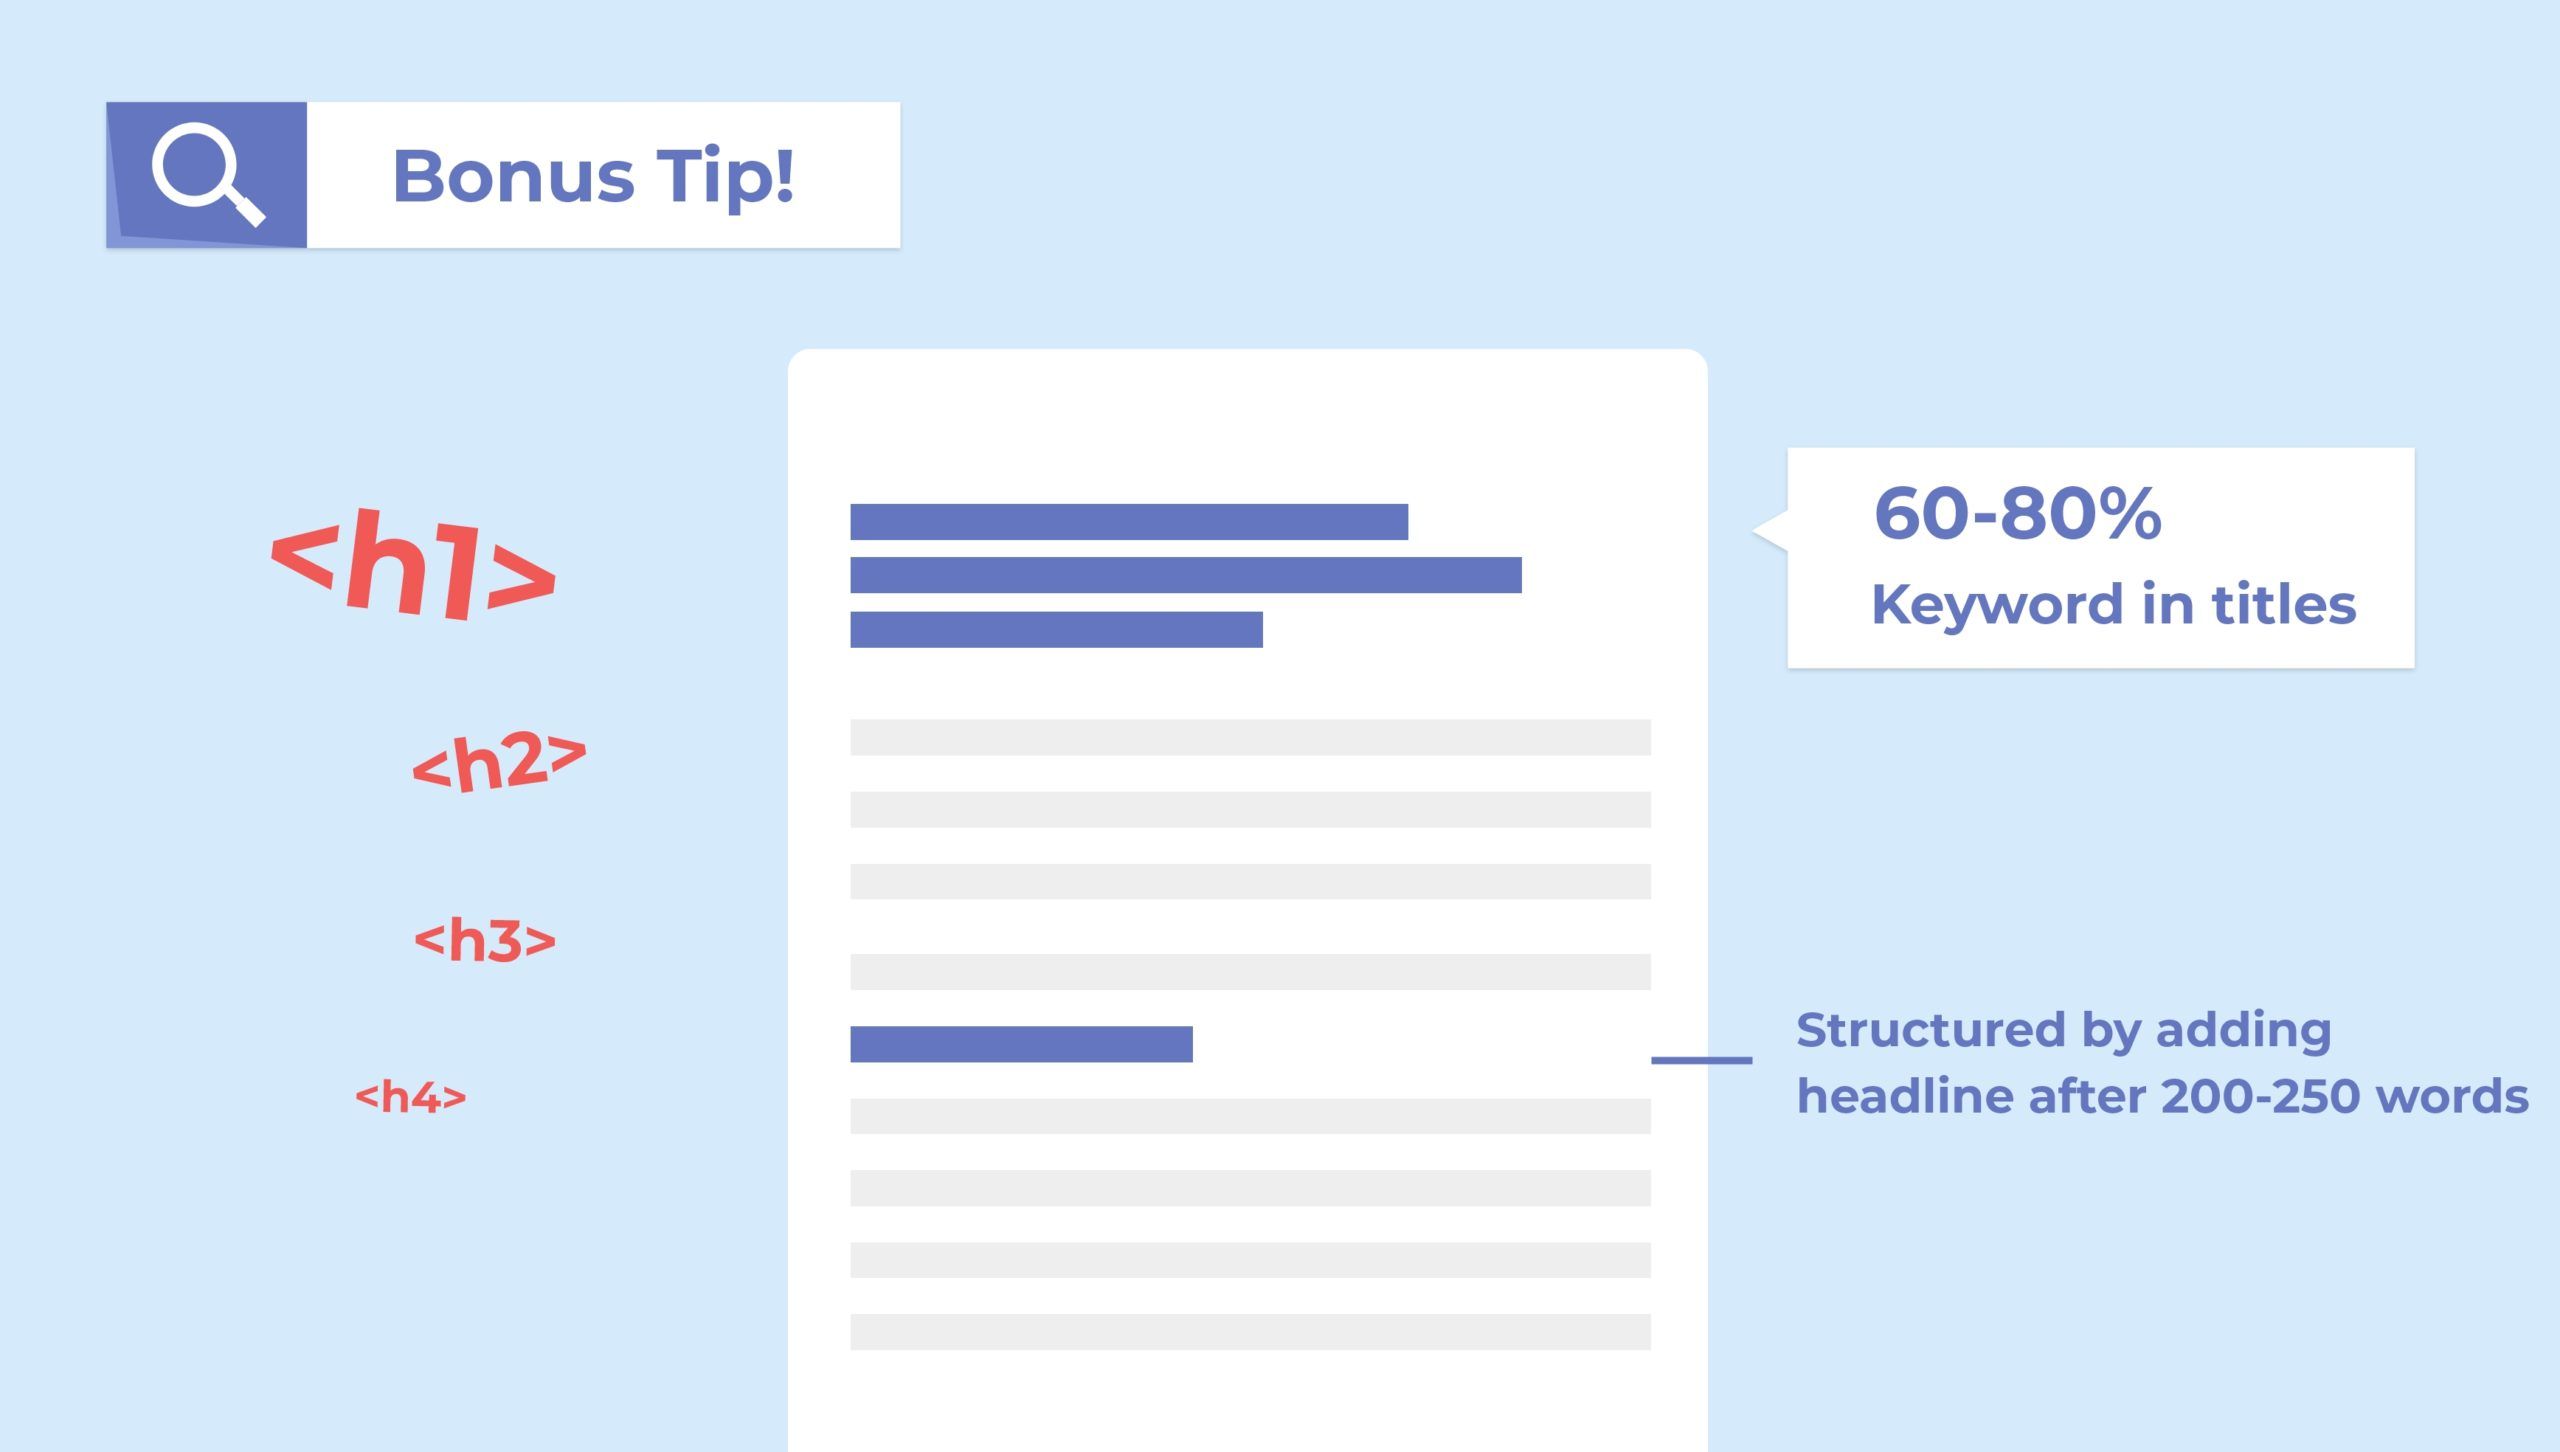 Use your keyword in 60-80% (3-4 out of 5 titles) of the titles.